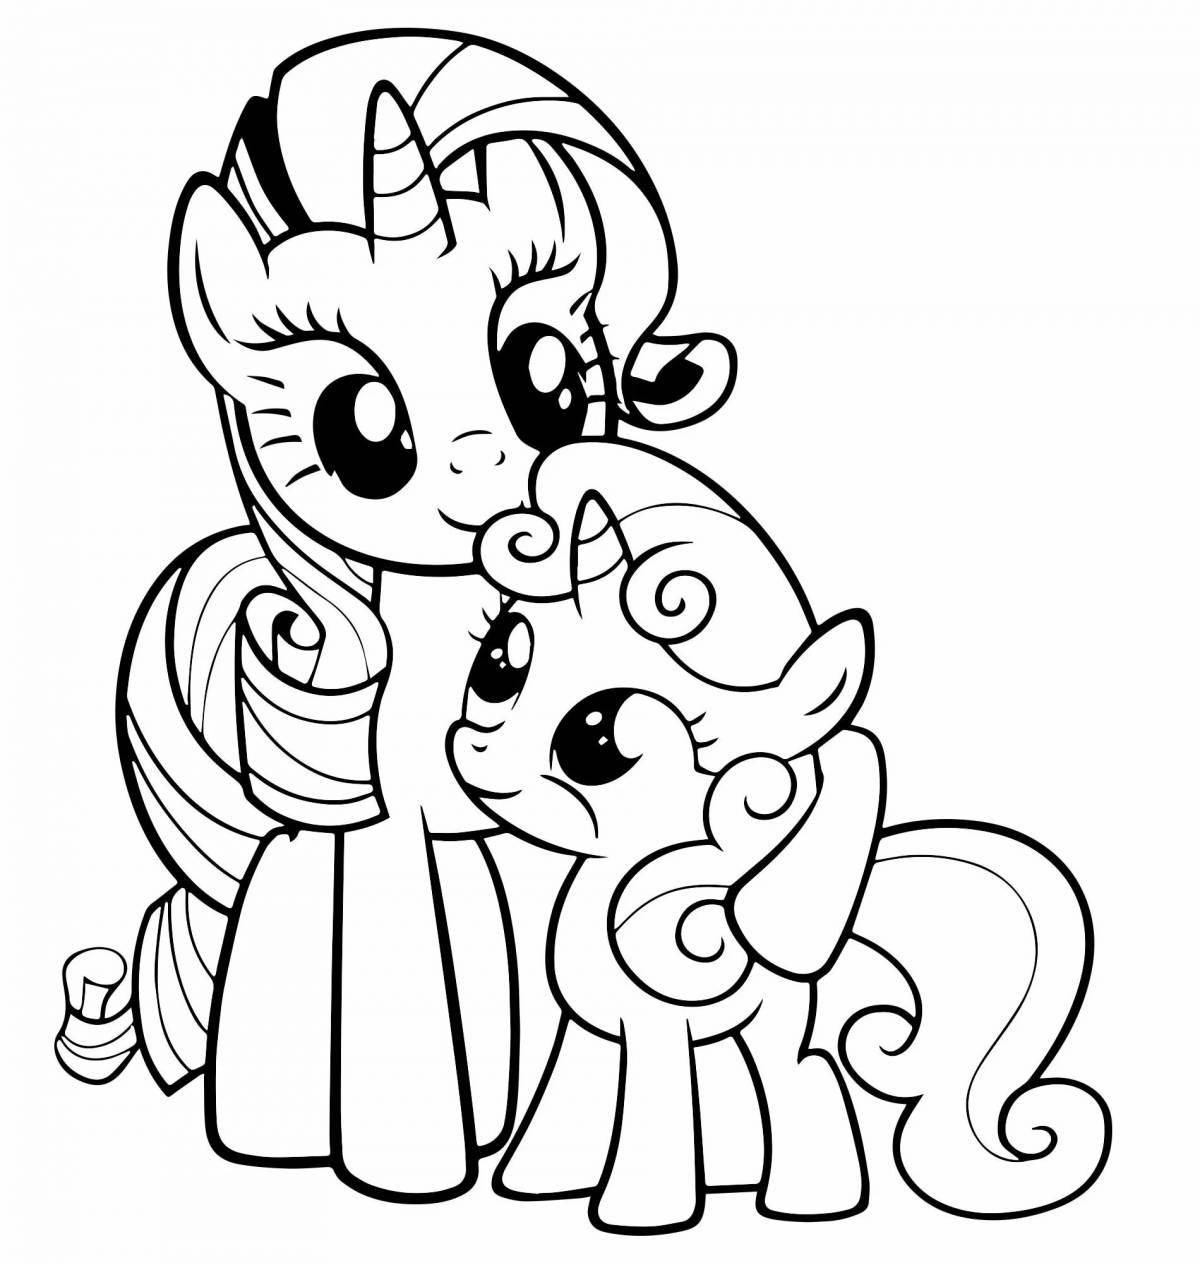 A funny pony coloring book for girls